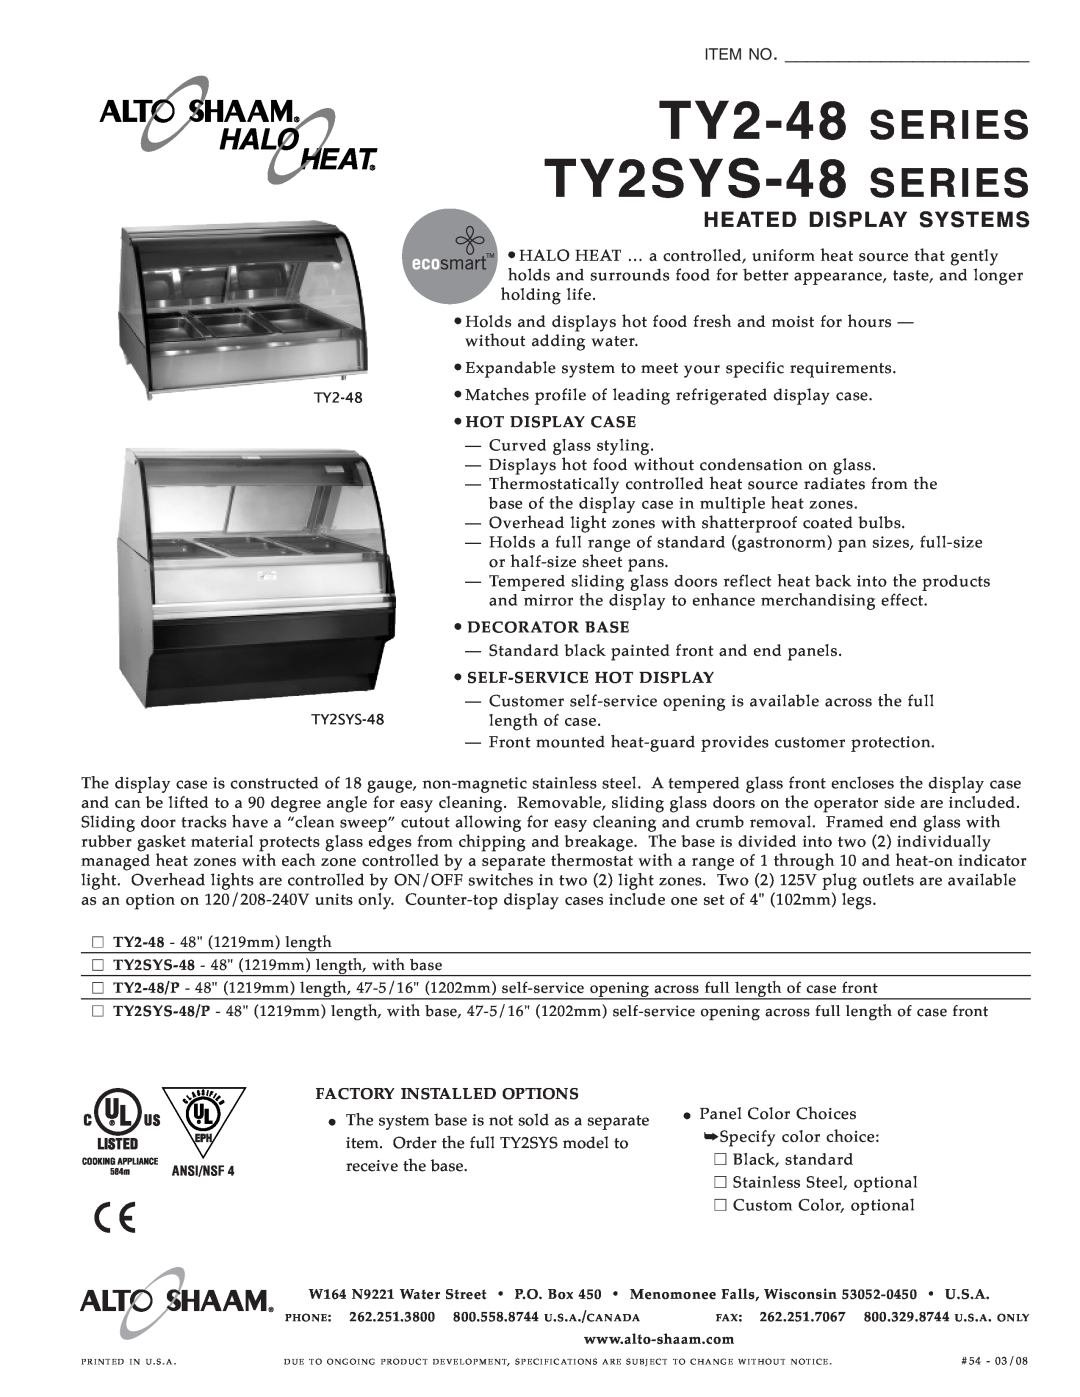 Alto-Shaam TY2SYS-48 specifications TY2-48 SERIES TY2S YS-48 SERIES, Item No, Heated Display Syste Ms 